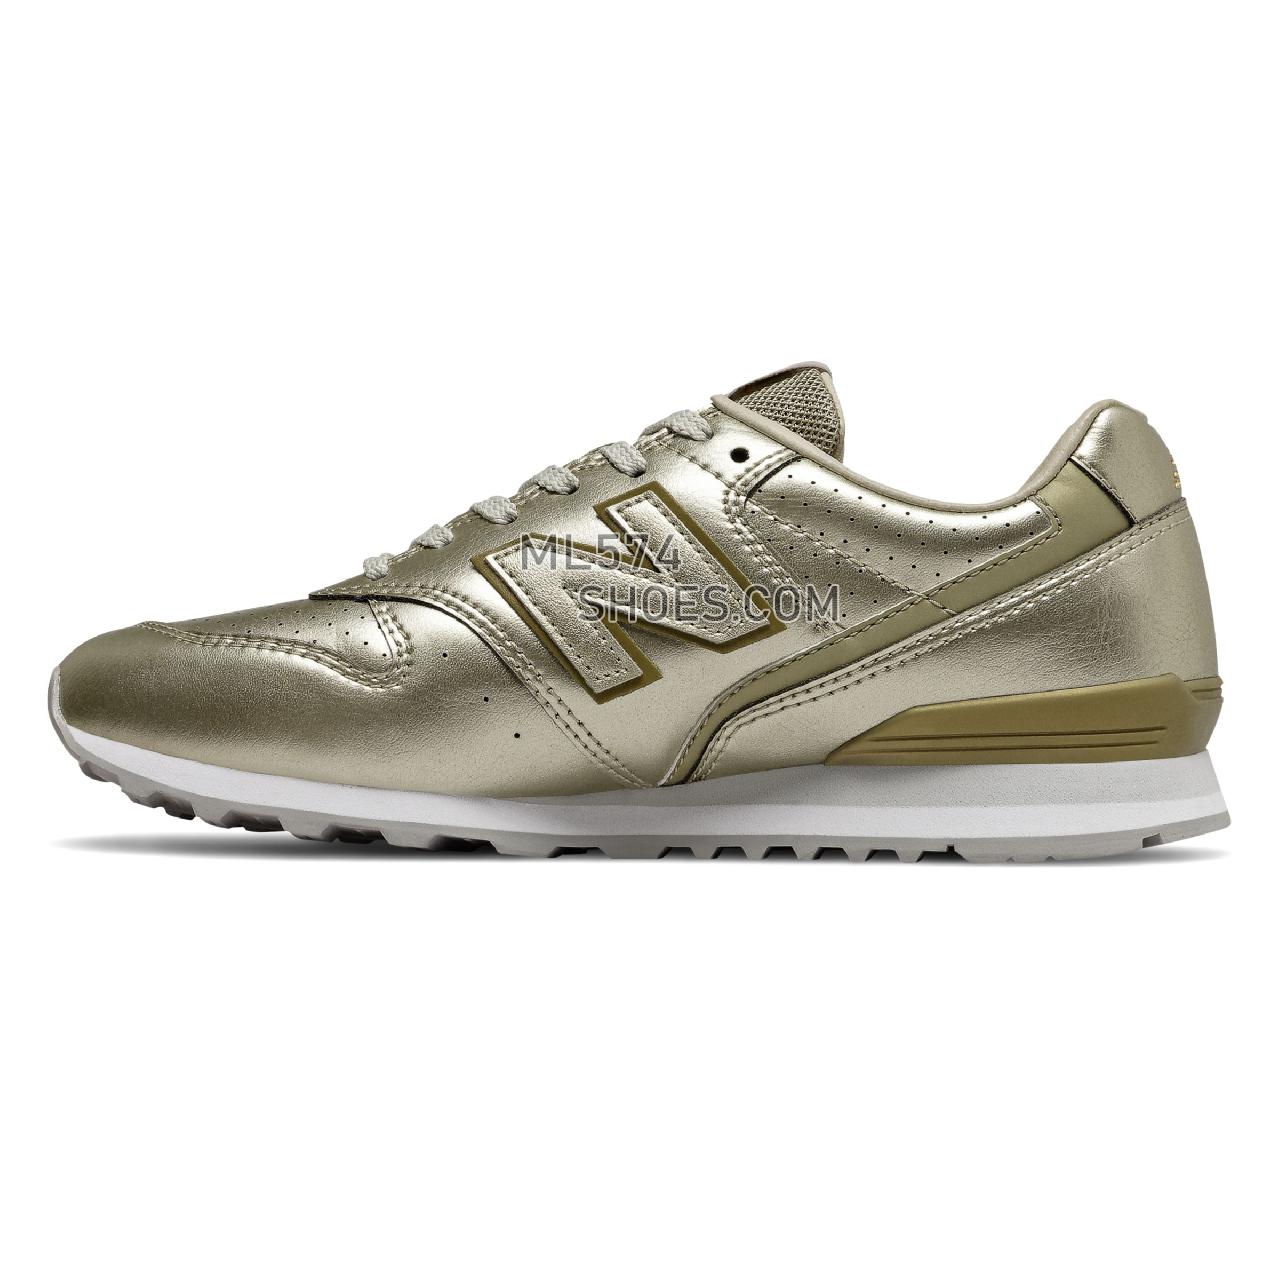 New Balance 996 - Women's 996 Classic - Gold with Munsell White - WL996ALT